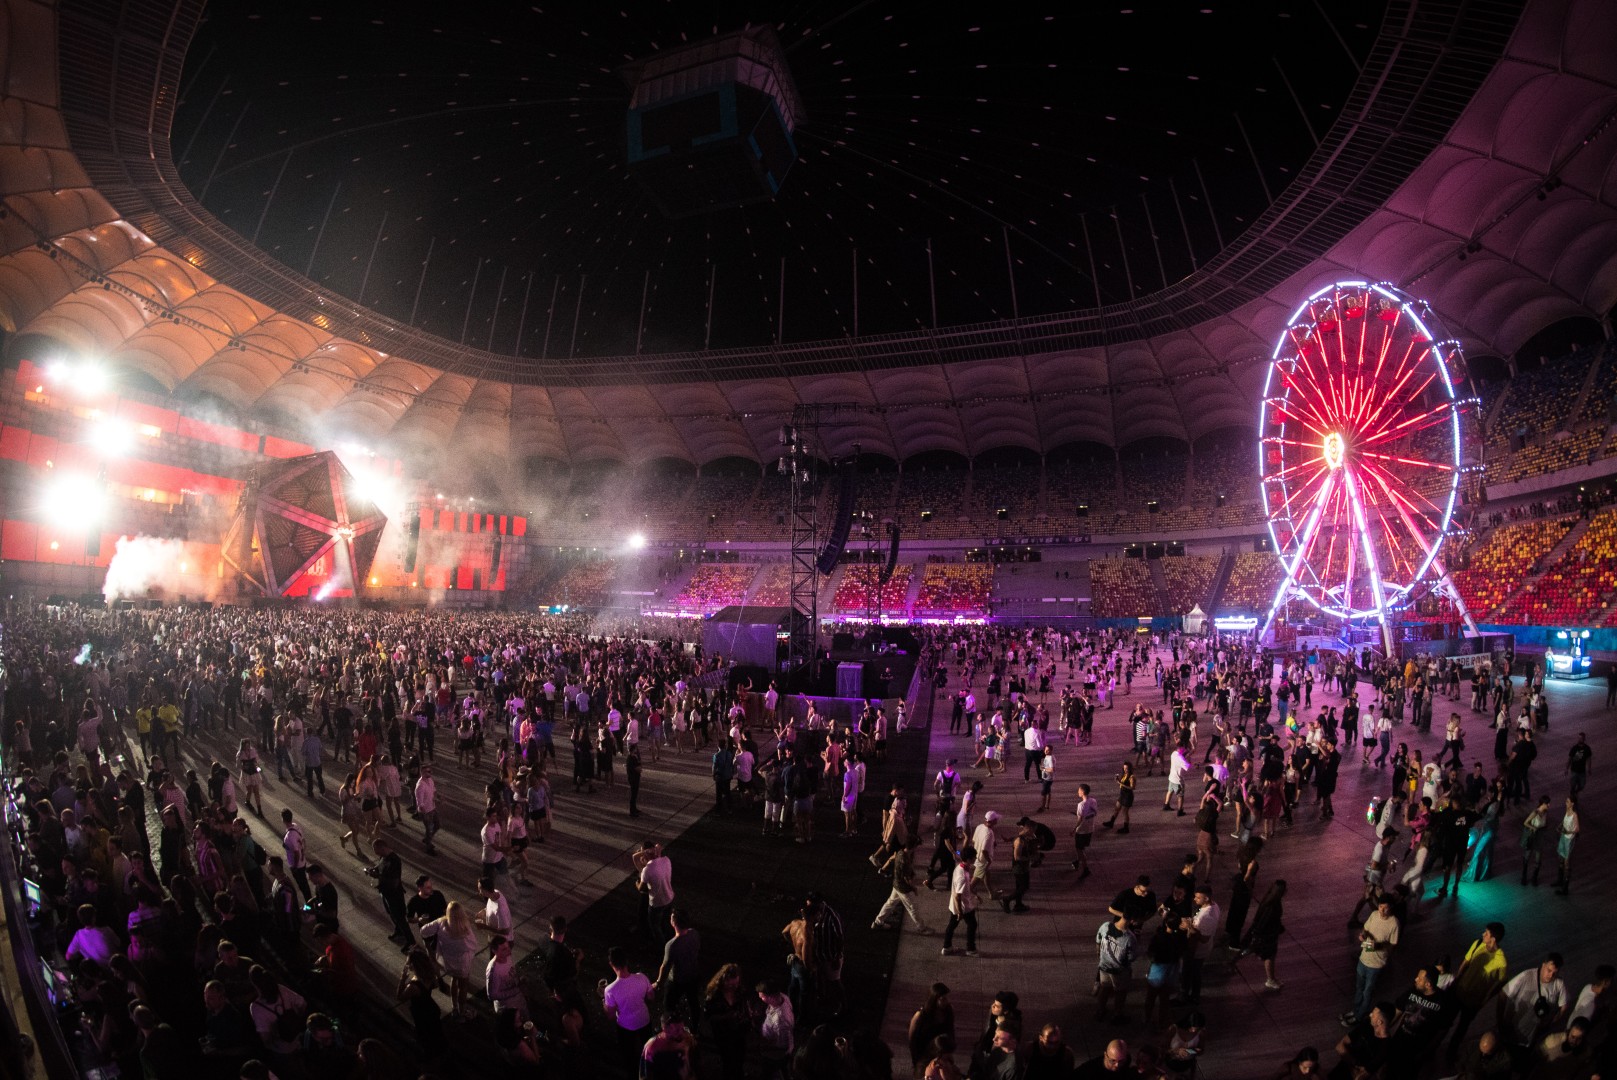 Public at National Arena in Bucharest on June 3, 2022 (669dbcfc73)